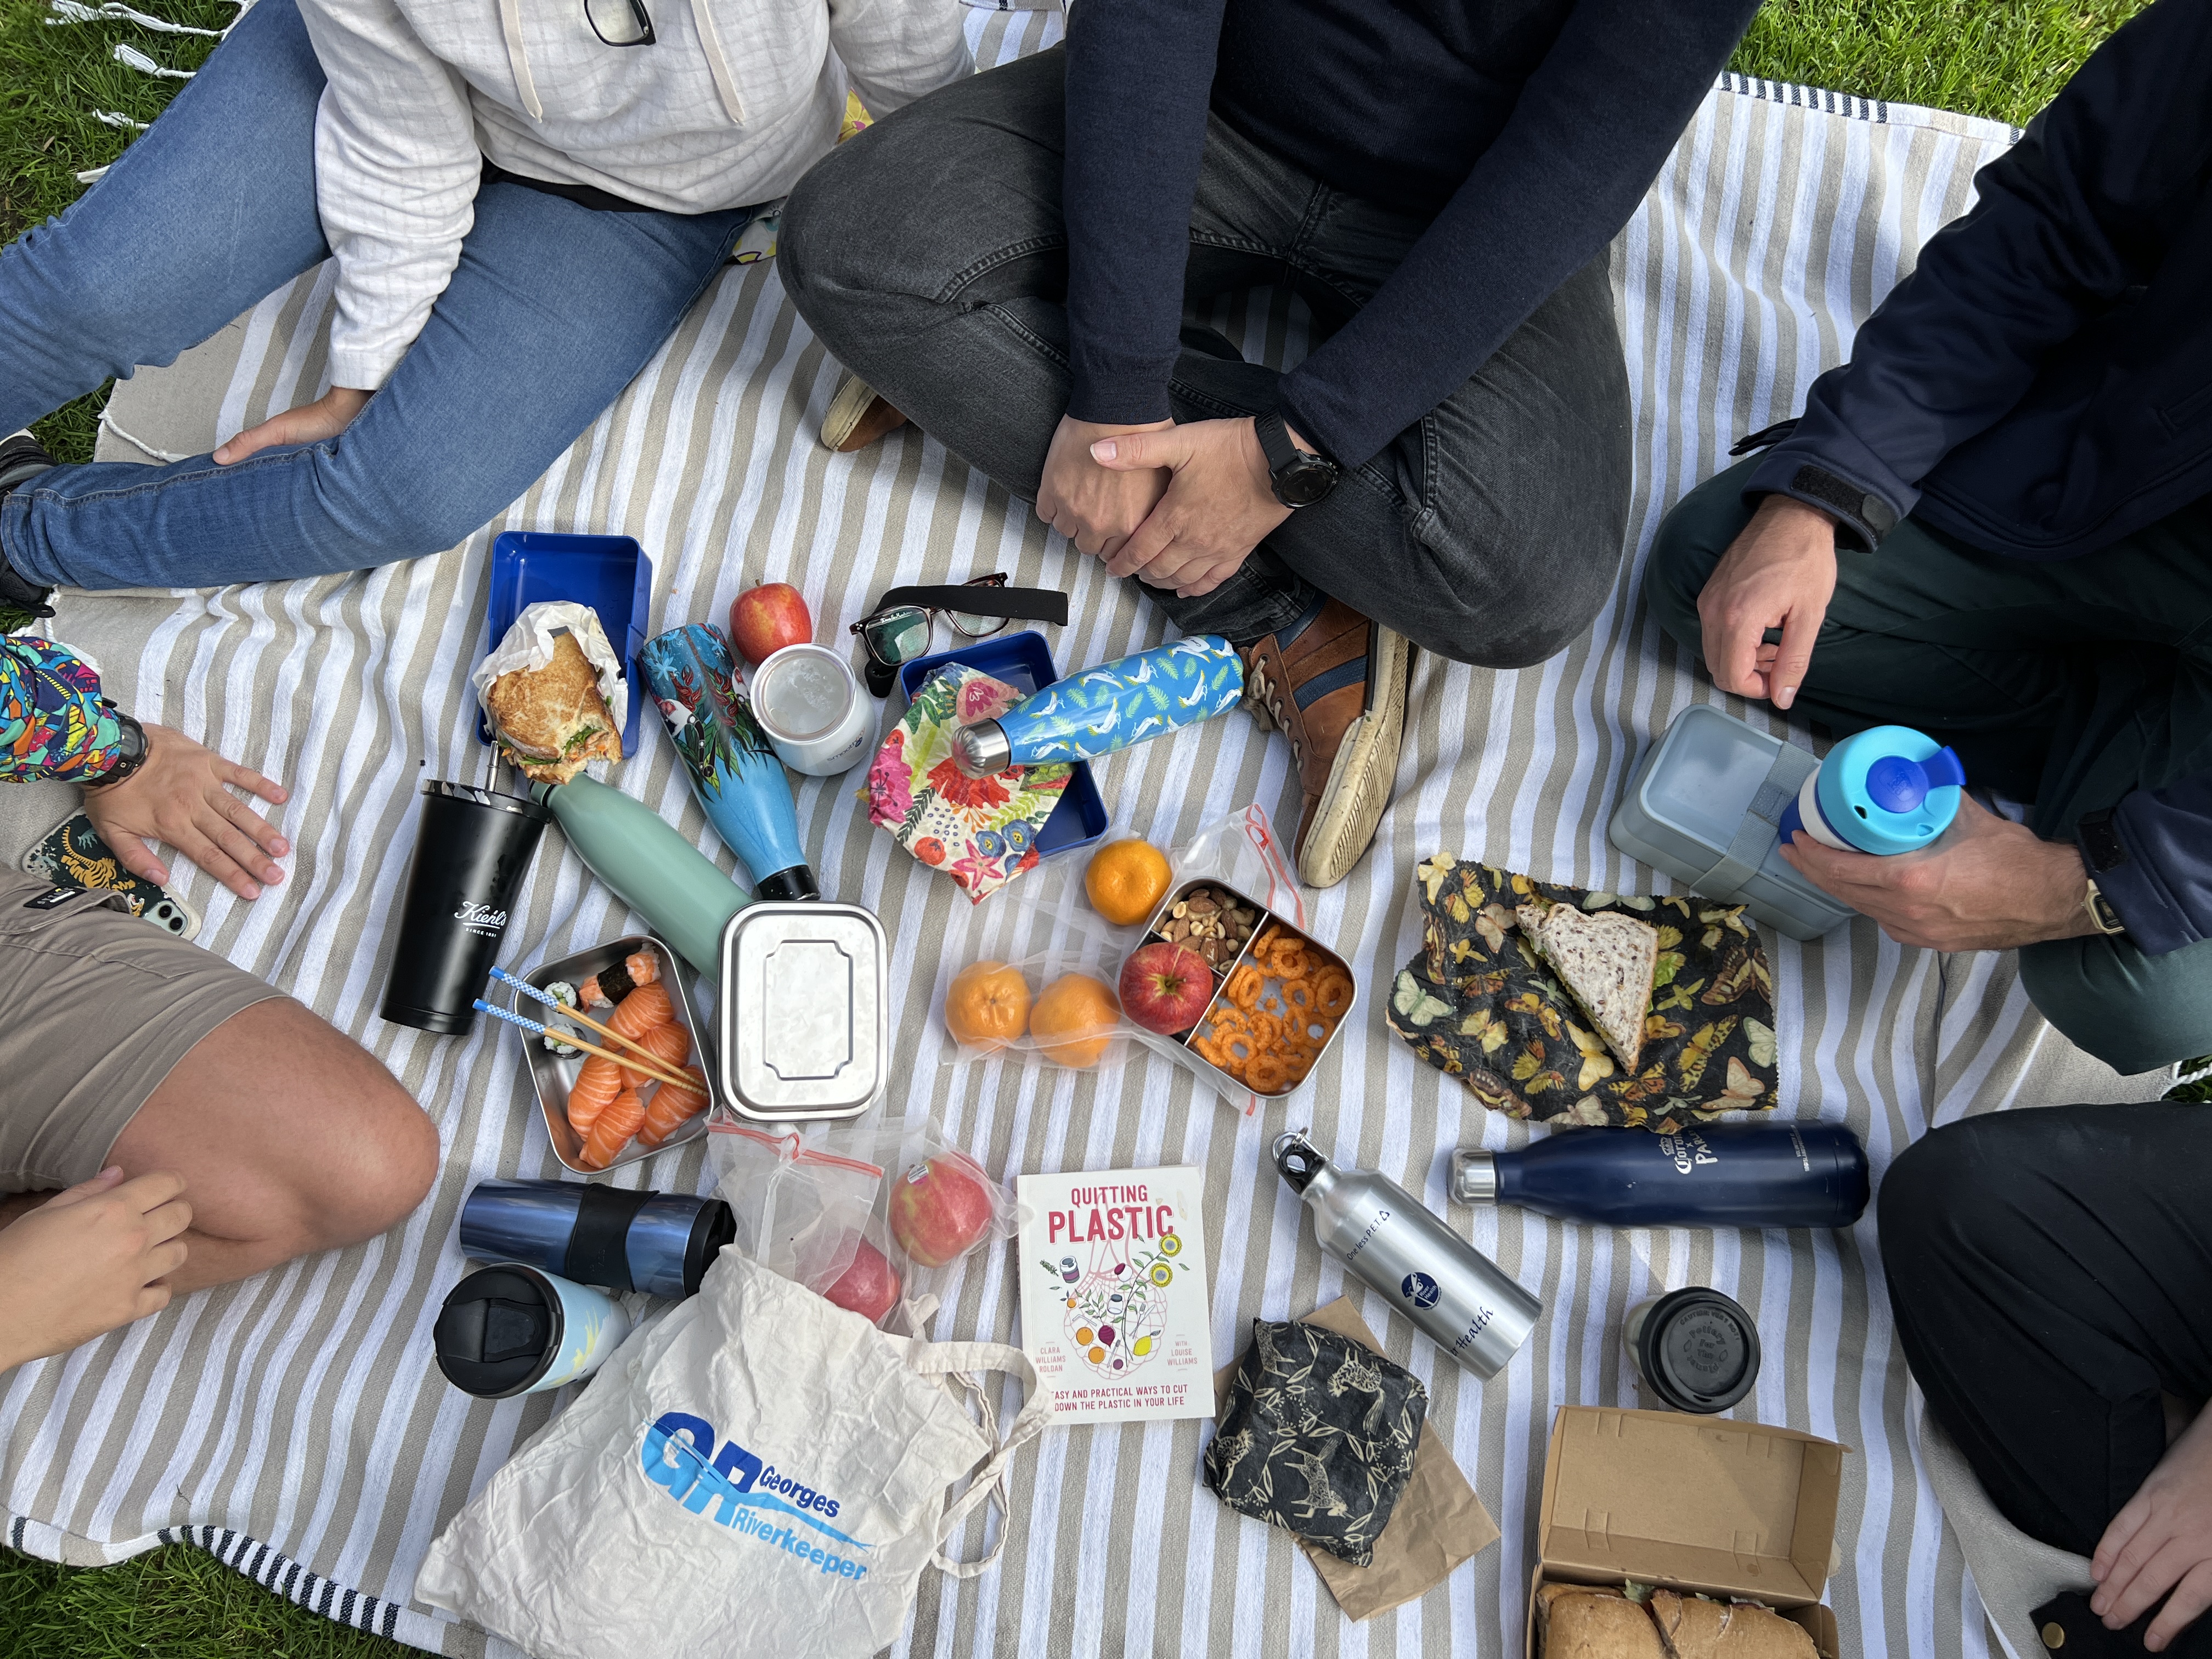 Presented by Georges Riverkeeper and Sutherland Shire Libraries, this event is part of the global Plastic Free July movement, dedicated to combating plastic pollution and fostering cleaner streets, waterways and communities.